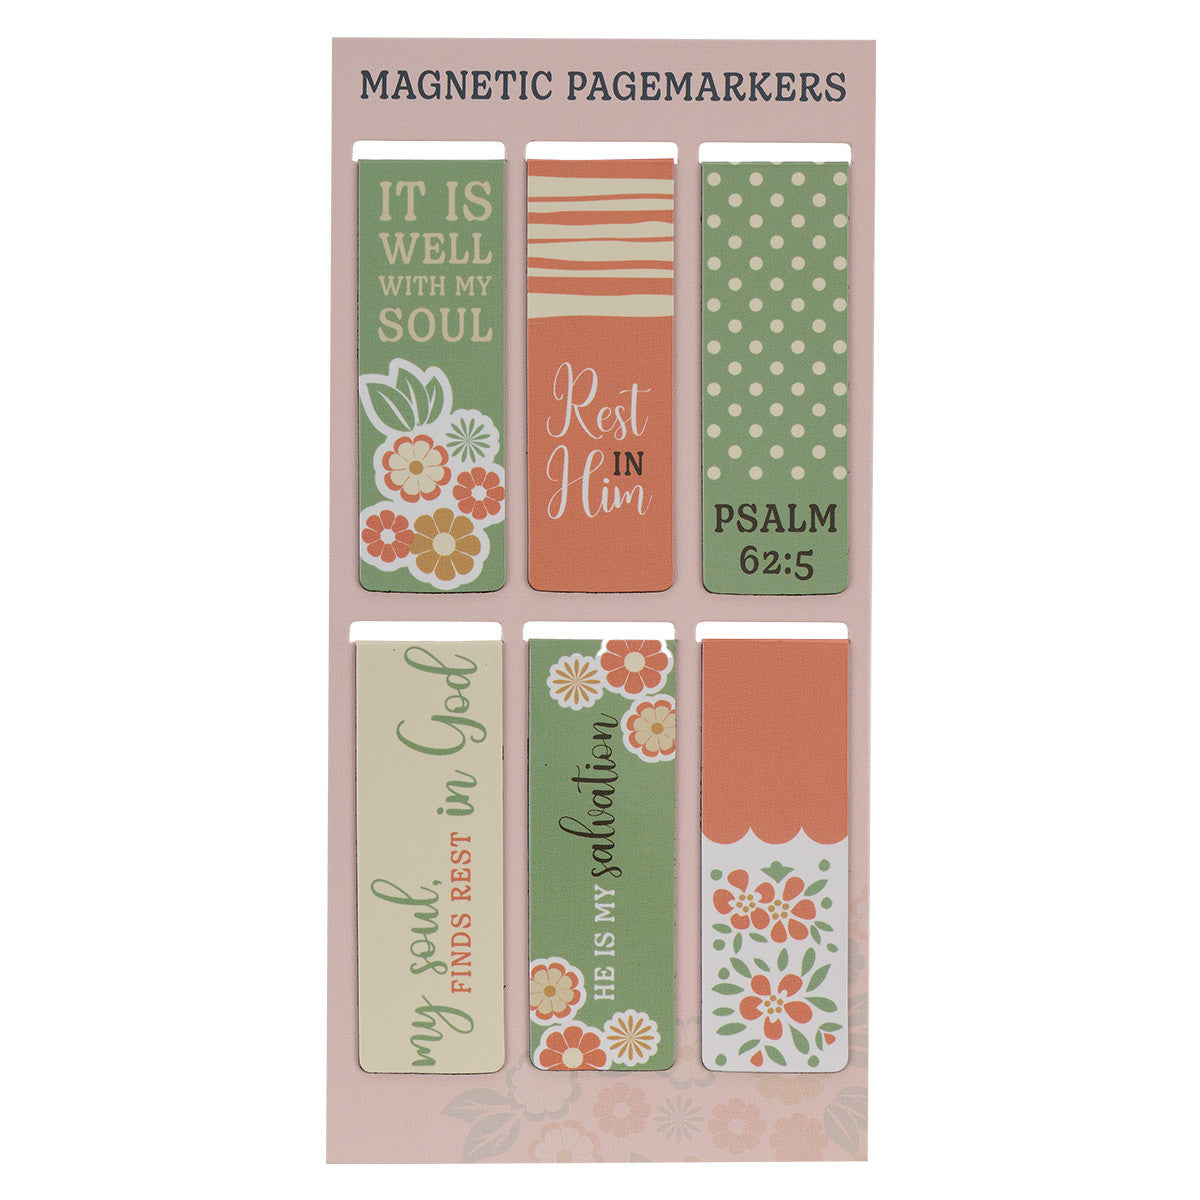 Magnetic page markers